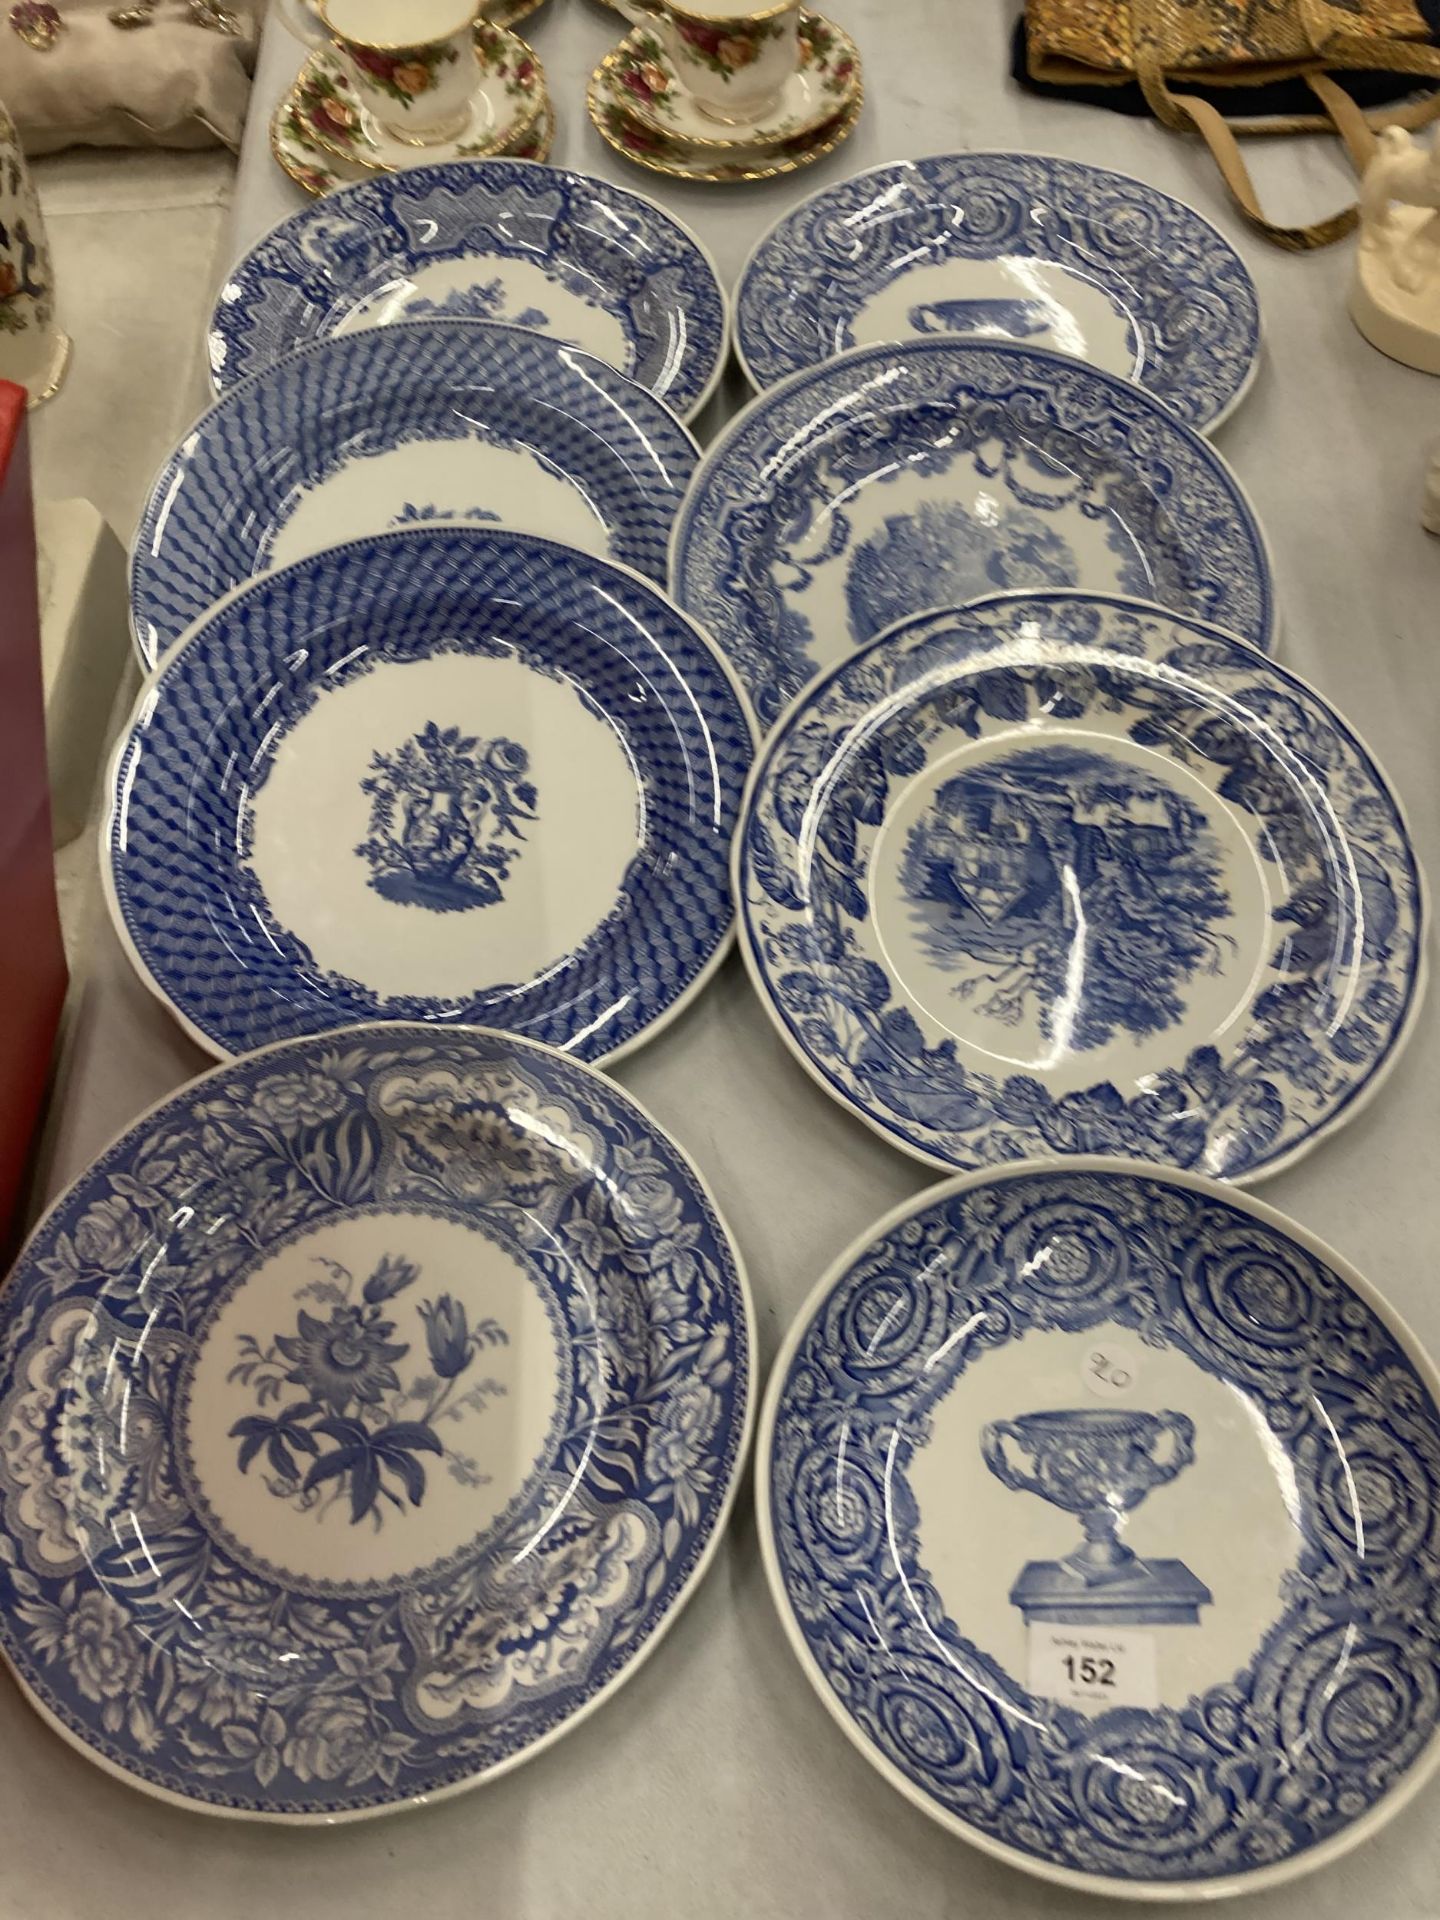 A COLLECTION OF 'THE SPODE BLUE ROOM' CABINET PLATES - 8 IN TOTAL